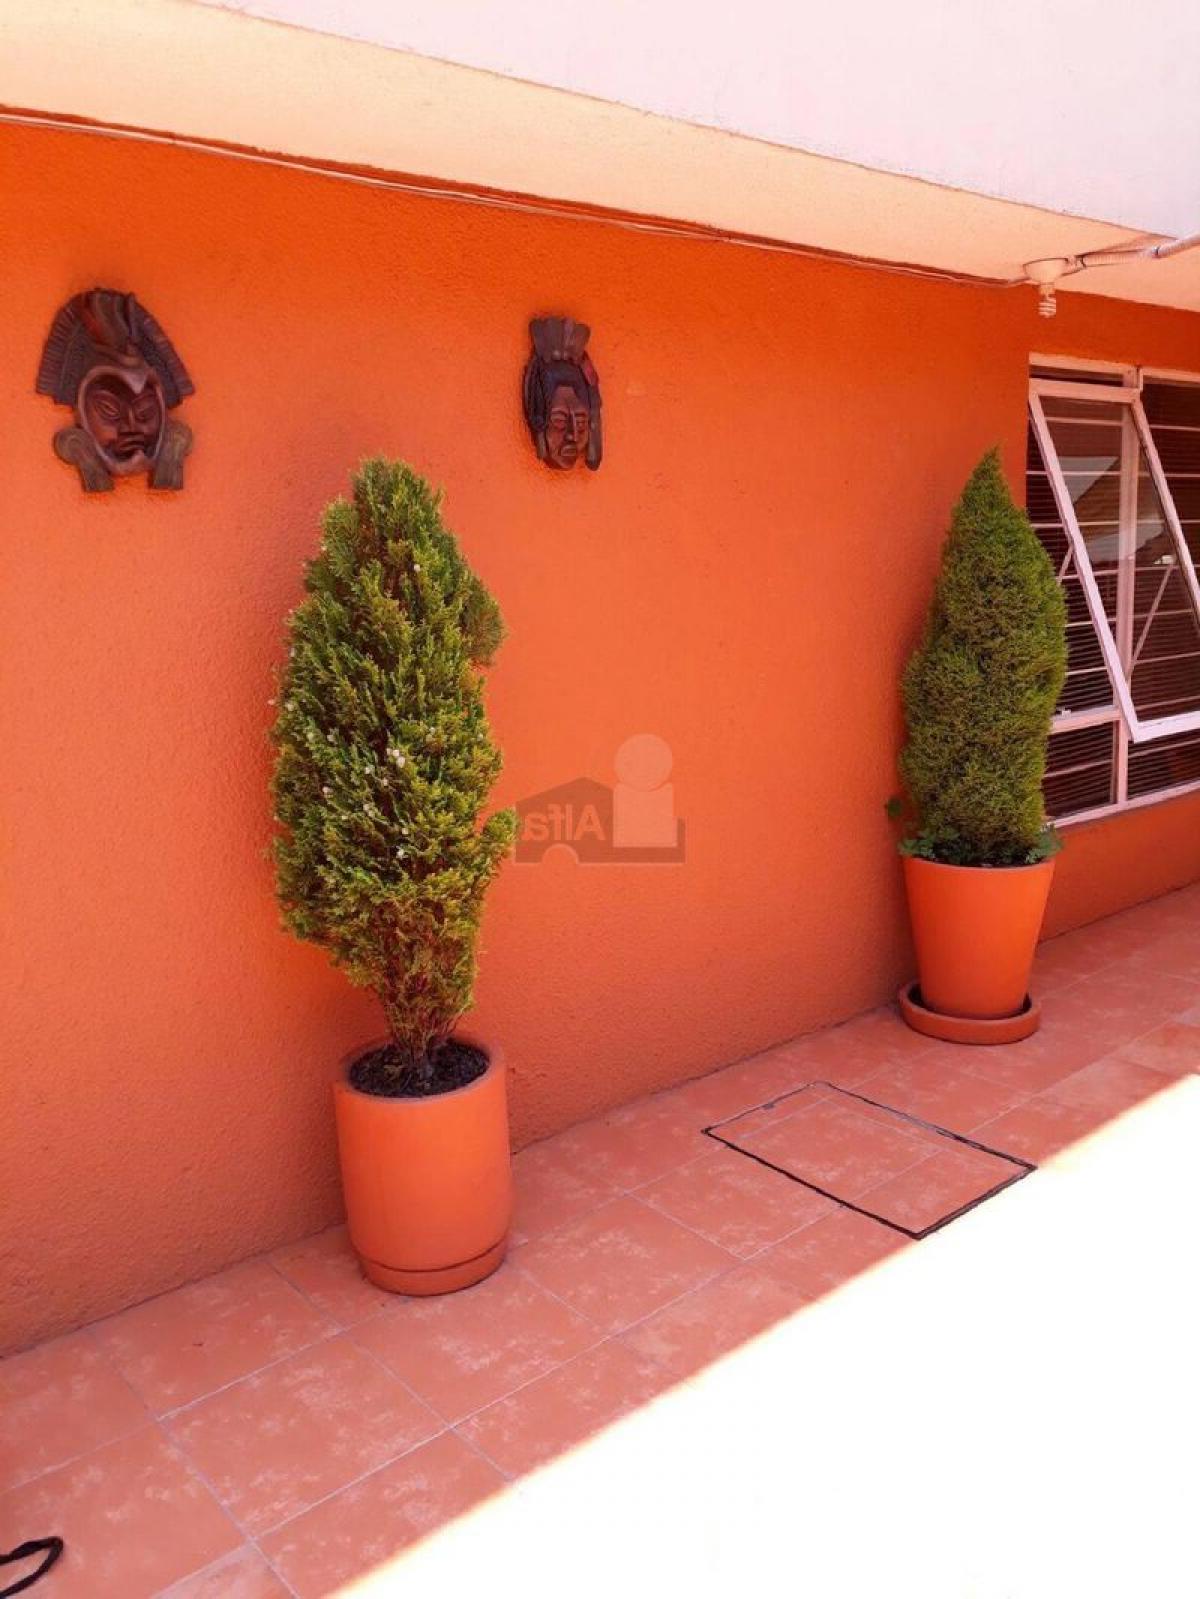 Picture of Apartment For Sale in Zempoala, Hidalgo, Mexico